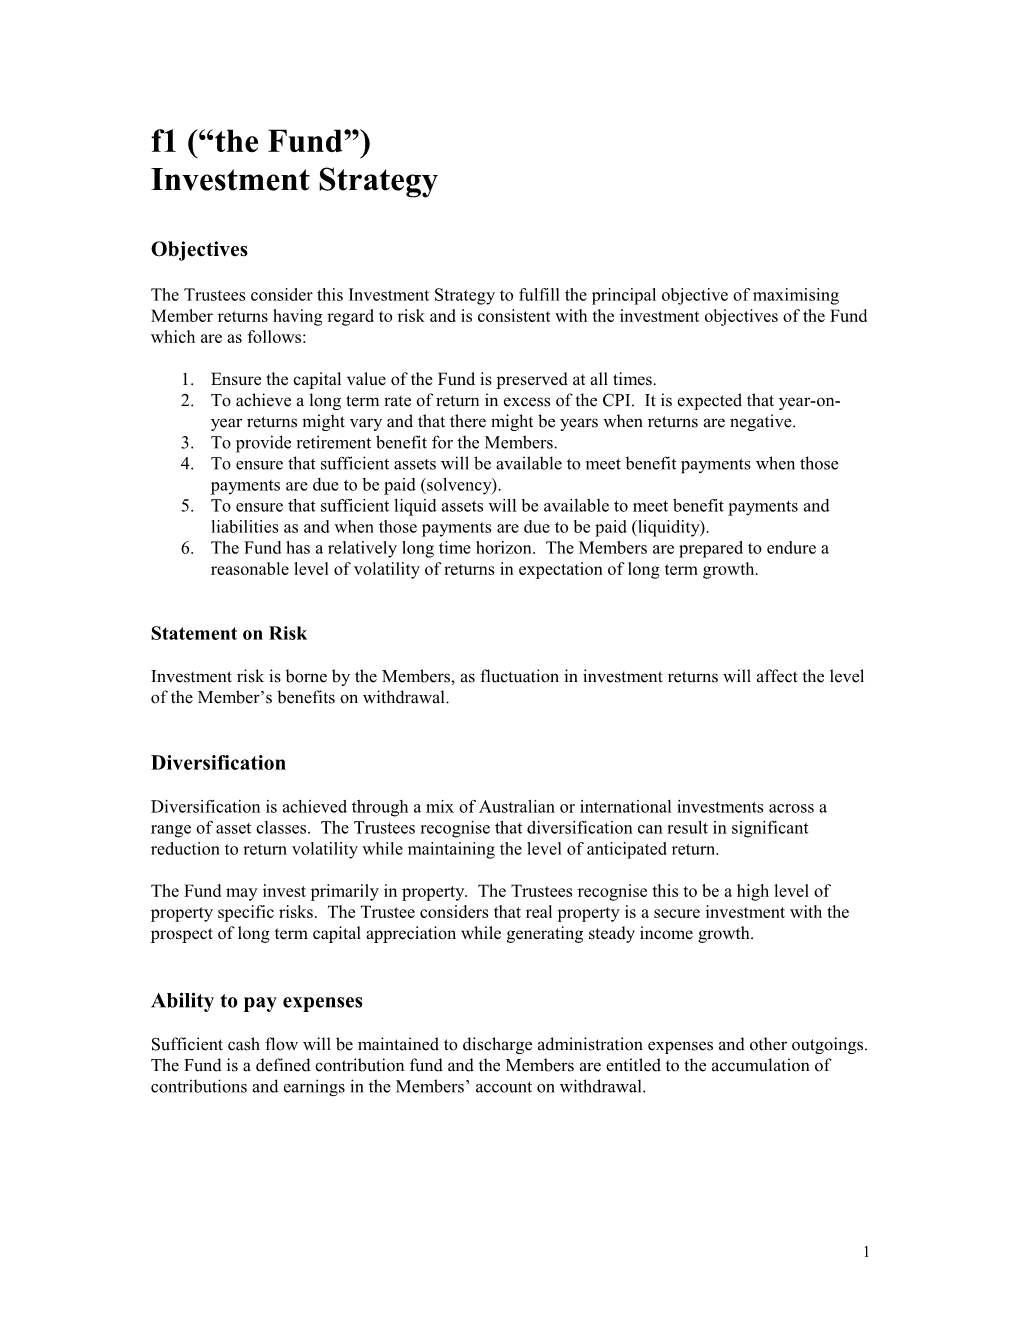 Investment Strategy for The